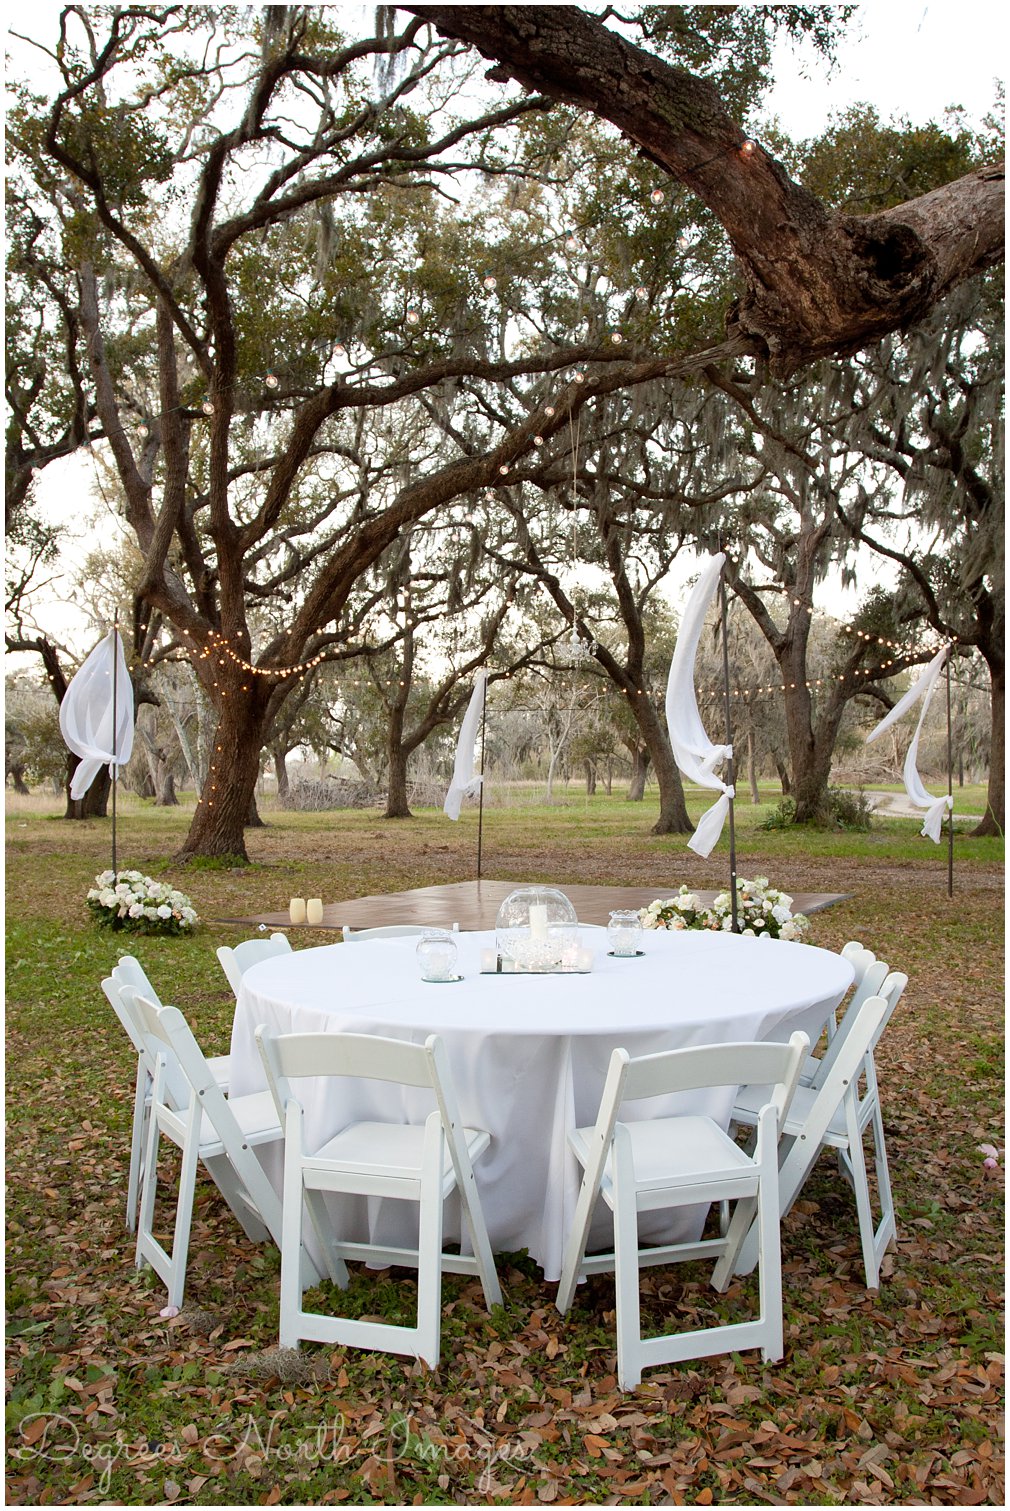 Bohemian outdoor wedding in Angleton, Texas by Degrees North Images.